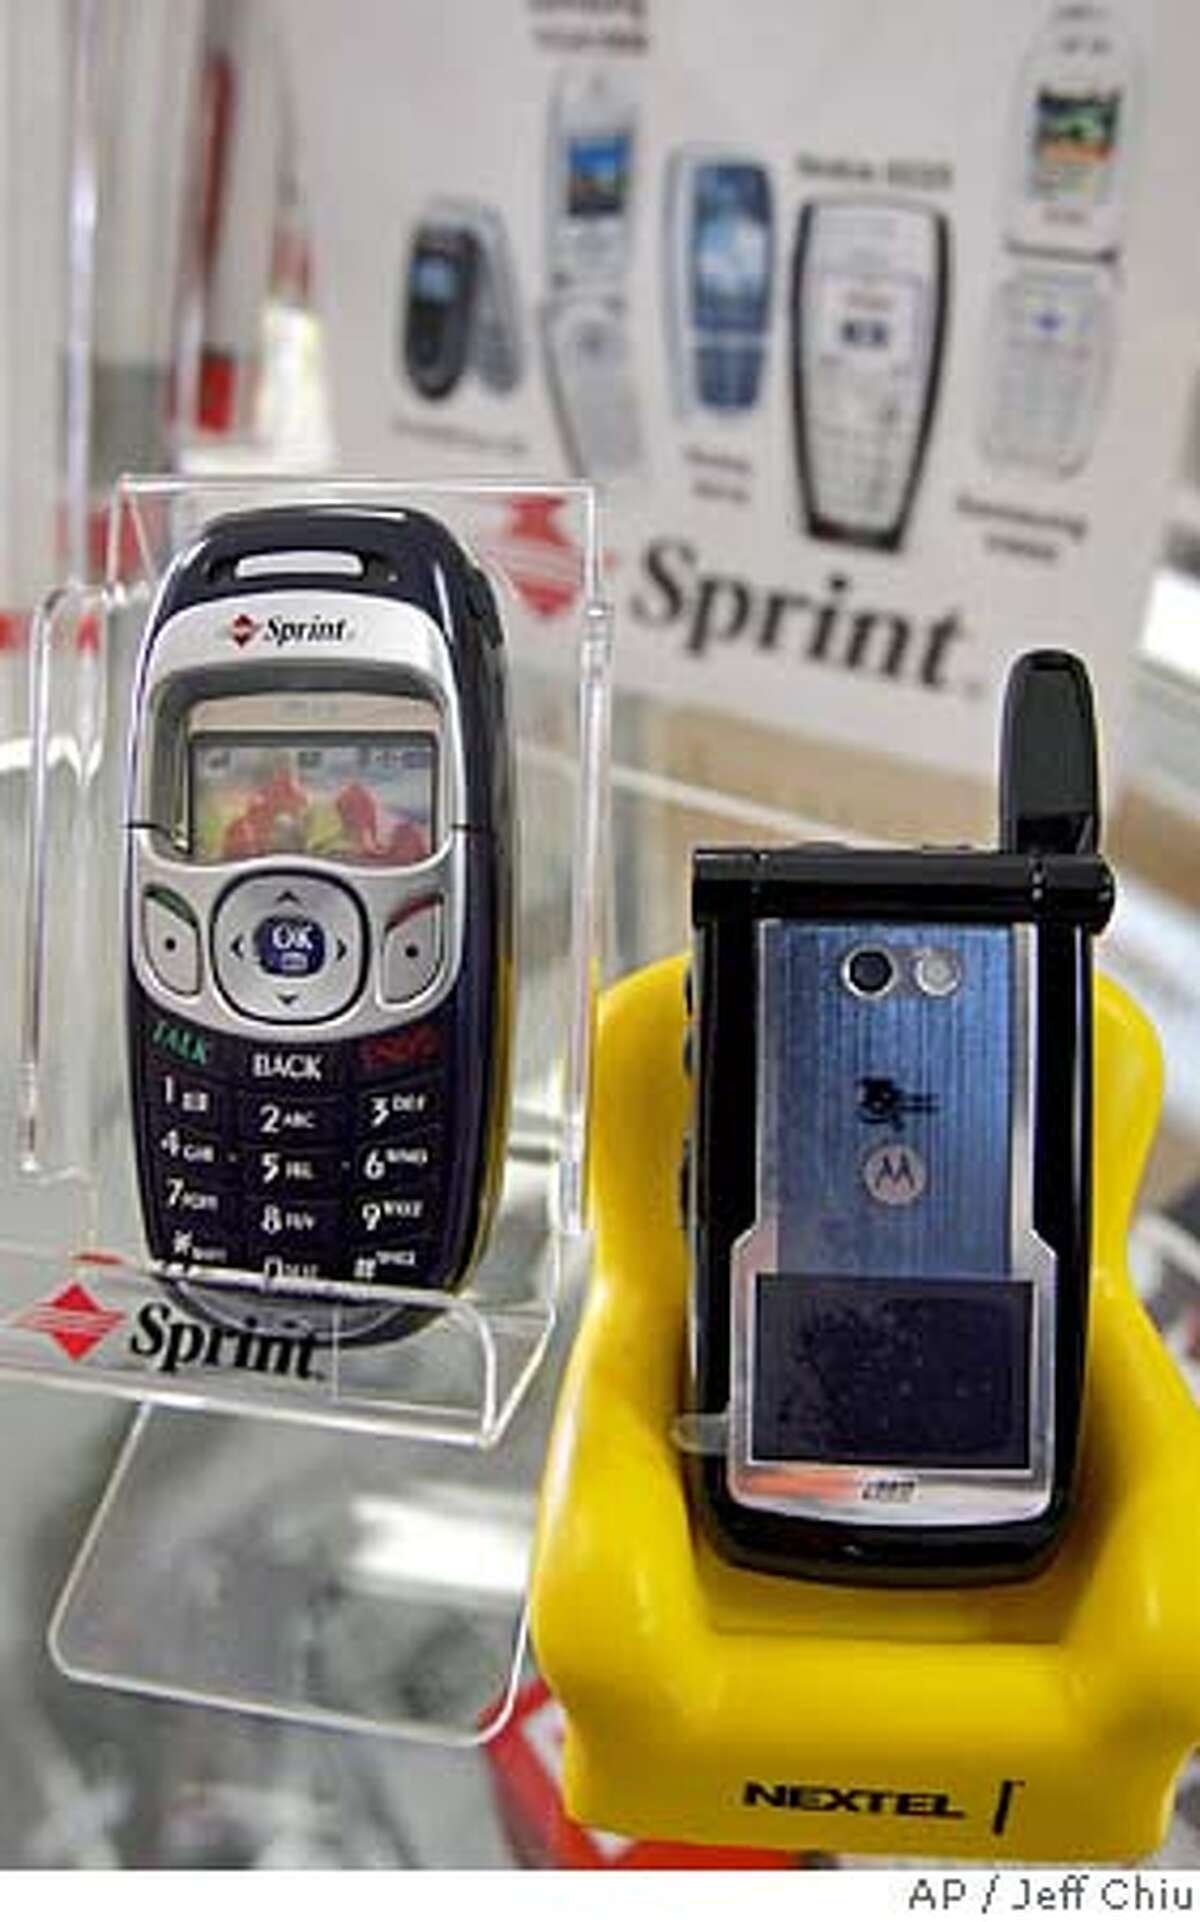 The Sprint LGPM325, left, and the Nextel Motorola i860 phones are shown at People's Wireless in San Francisco, Wednesday, Dec. 15, 2004. The $35 billion merger of Sprint Corp. and Nextel Communications Inc. could challenge Cingular Wireless and Verizon Wireless for supremacy in a ruthlessly competitive business where prices are constantly dropping. The merger, if approved, would create a company called Sprint Nextel with 35 million wireless subscribers and a combined $40 billion in annual revenue, cementing Sprint's spot as the country's third largest wireless business after Cingular and Verizon. (AP Photo/Jeff Chiu)